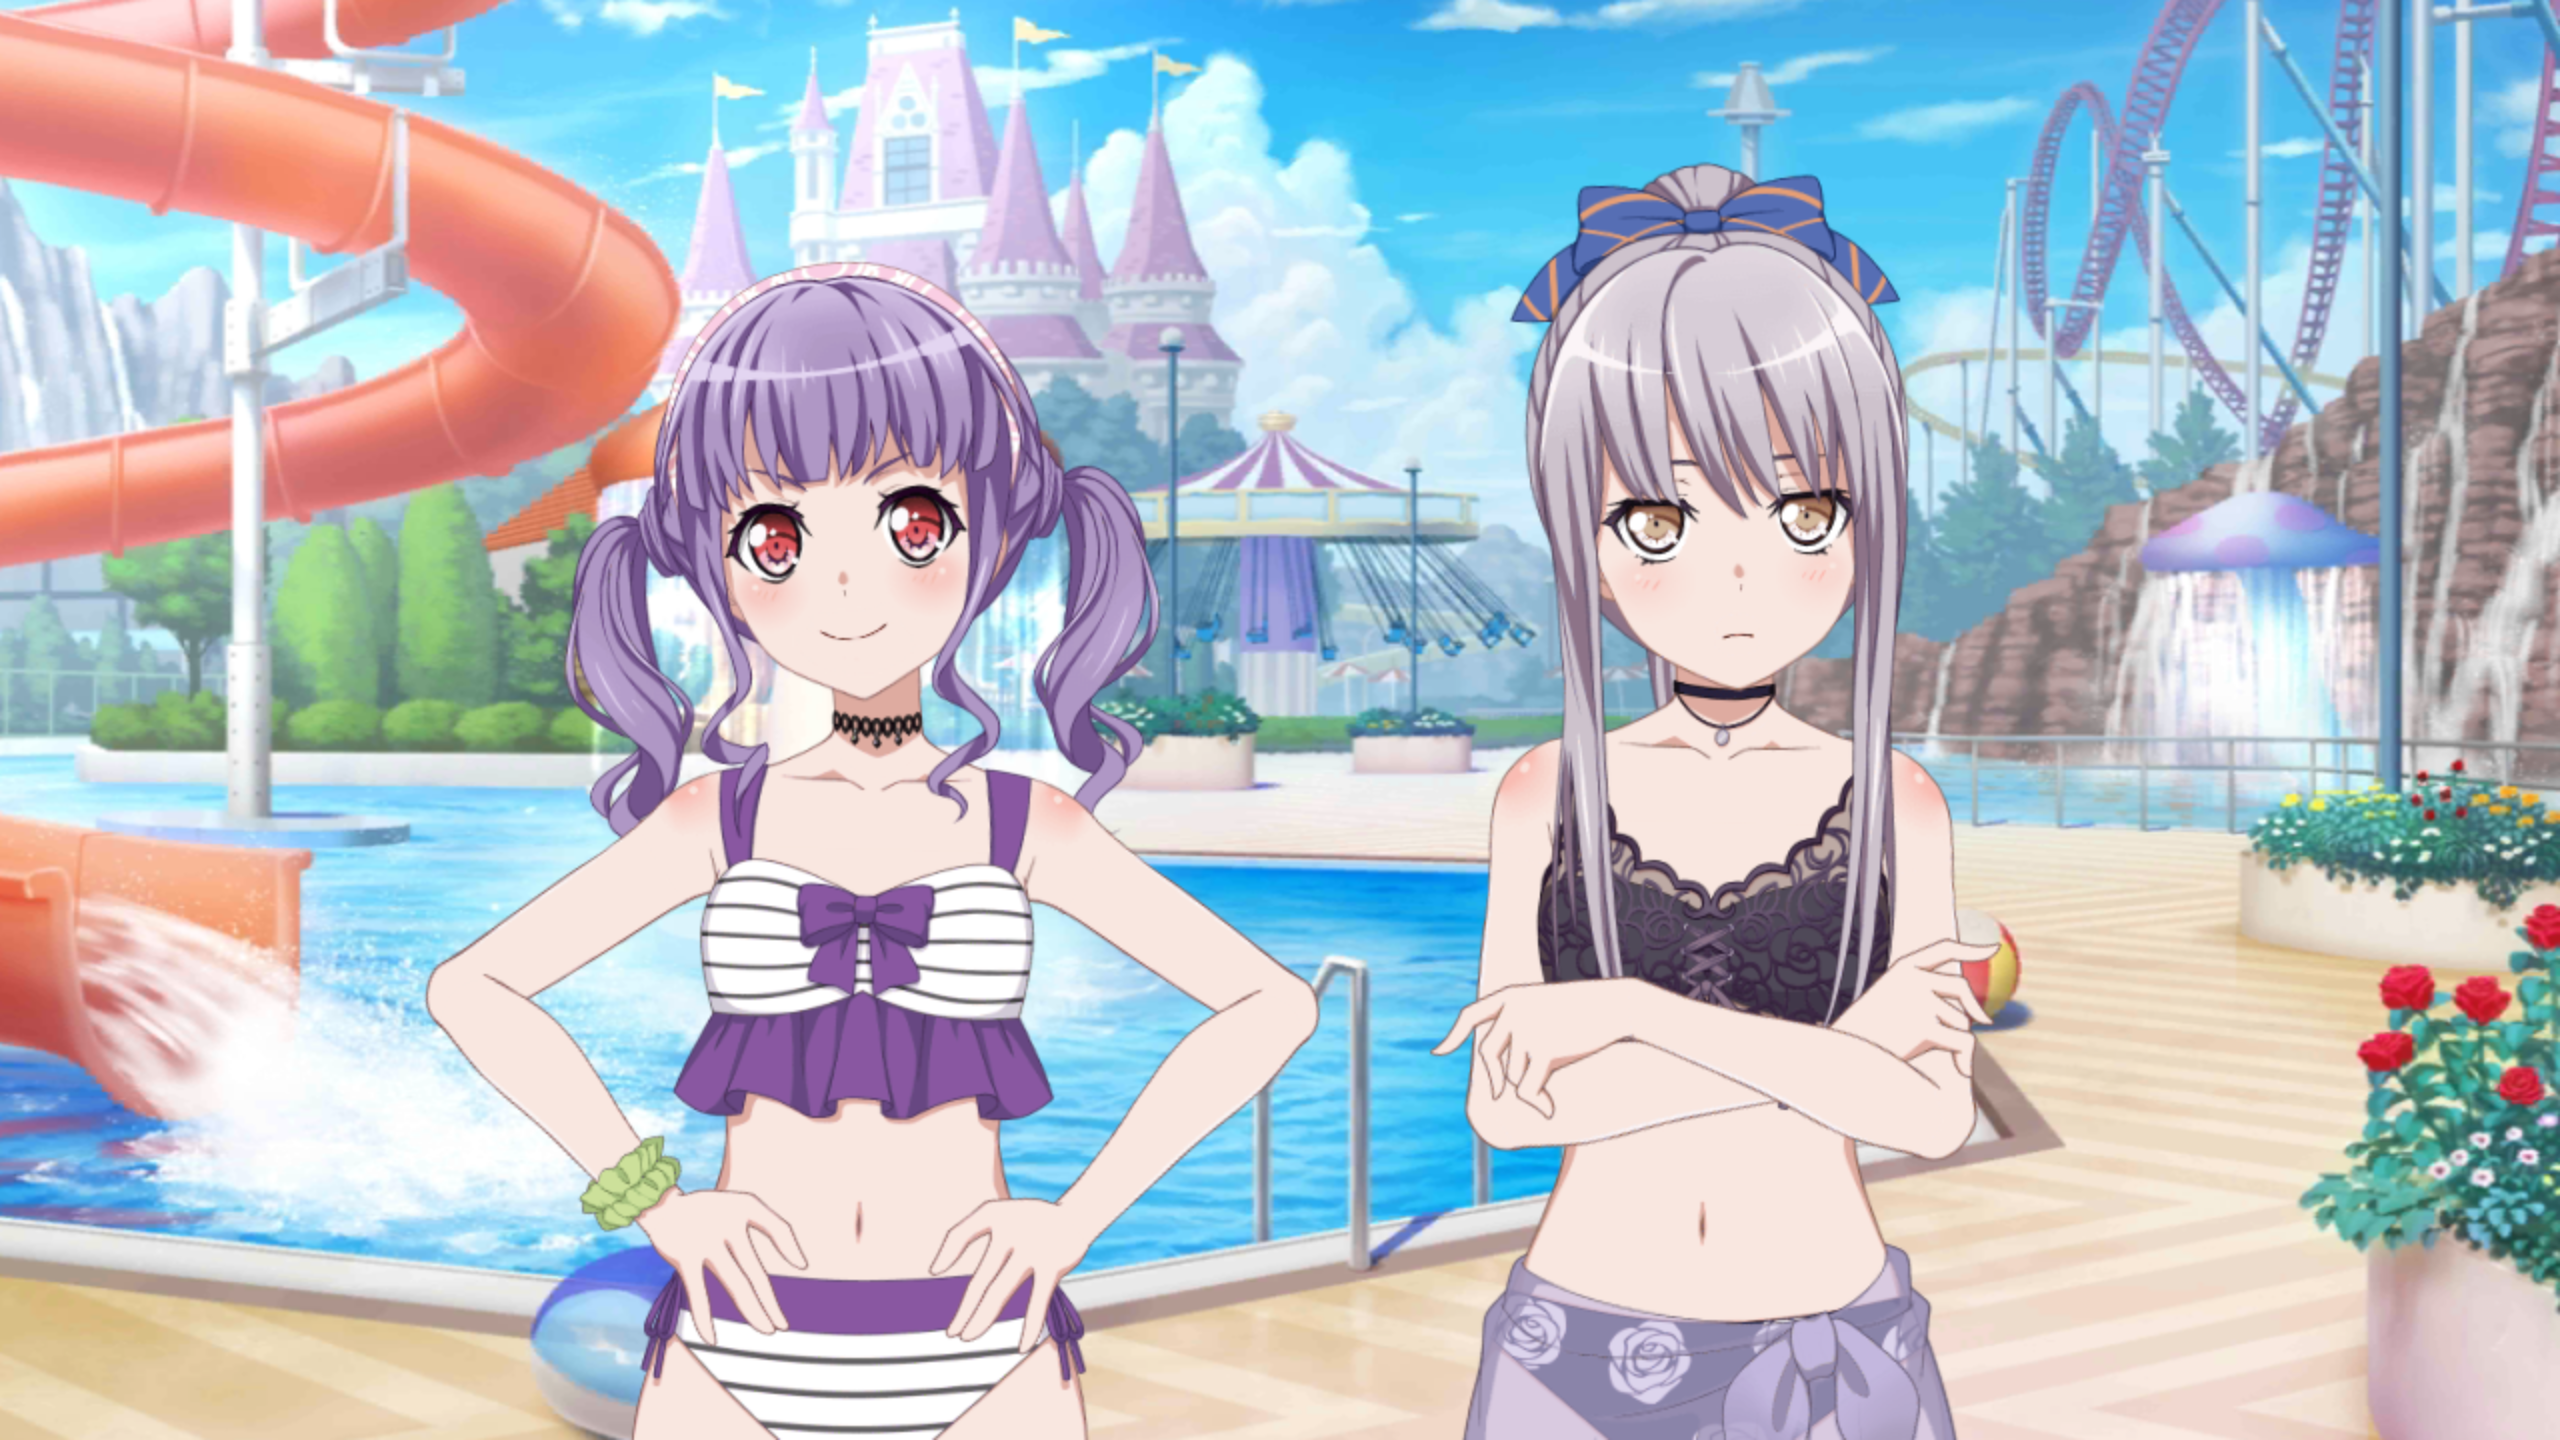 Does anyone know if they will ever bring back past events on ww, I'm so sad  I missed the Happy Summer Vacation event :( : r/BanGDream